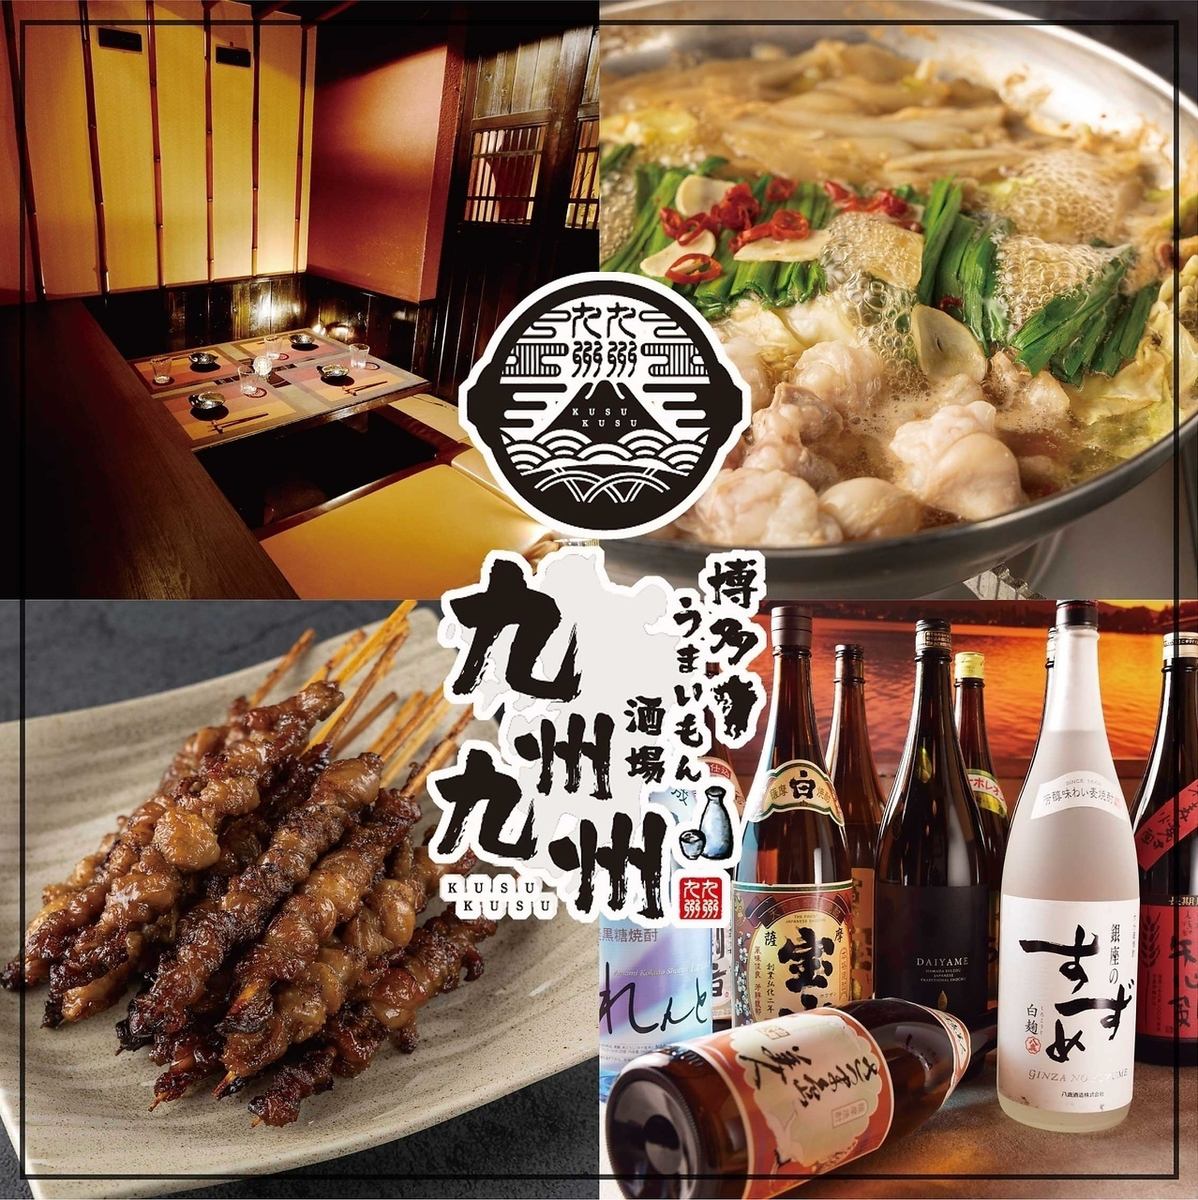 1 minute walk from Nippori Station! The night view sunken kotatsu by the window is popular! Enjoy exquisite Kyushu cuisine in a relaxing private room♪